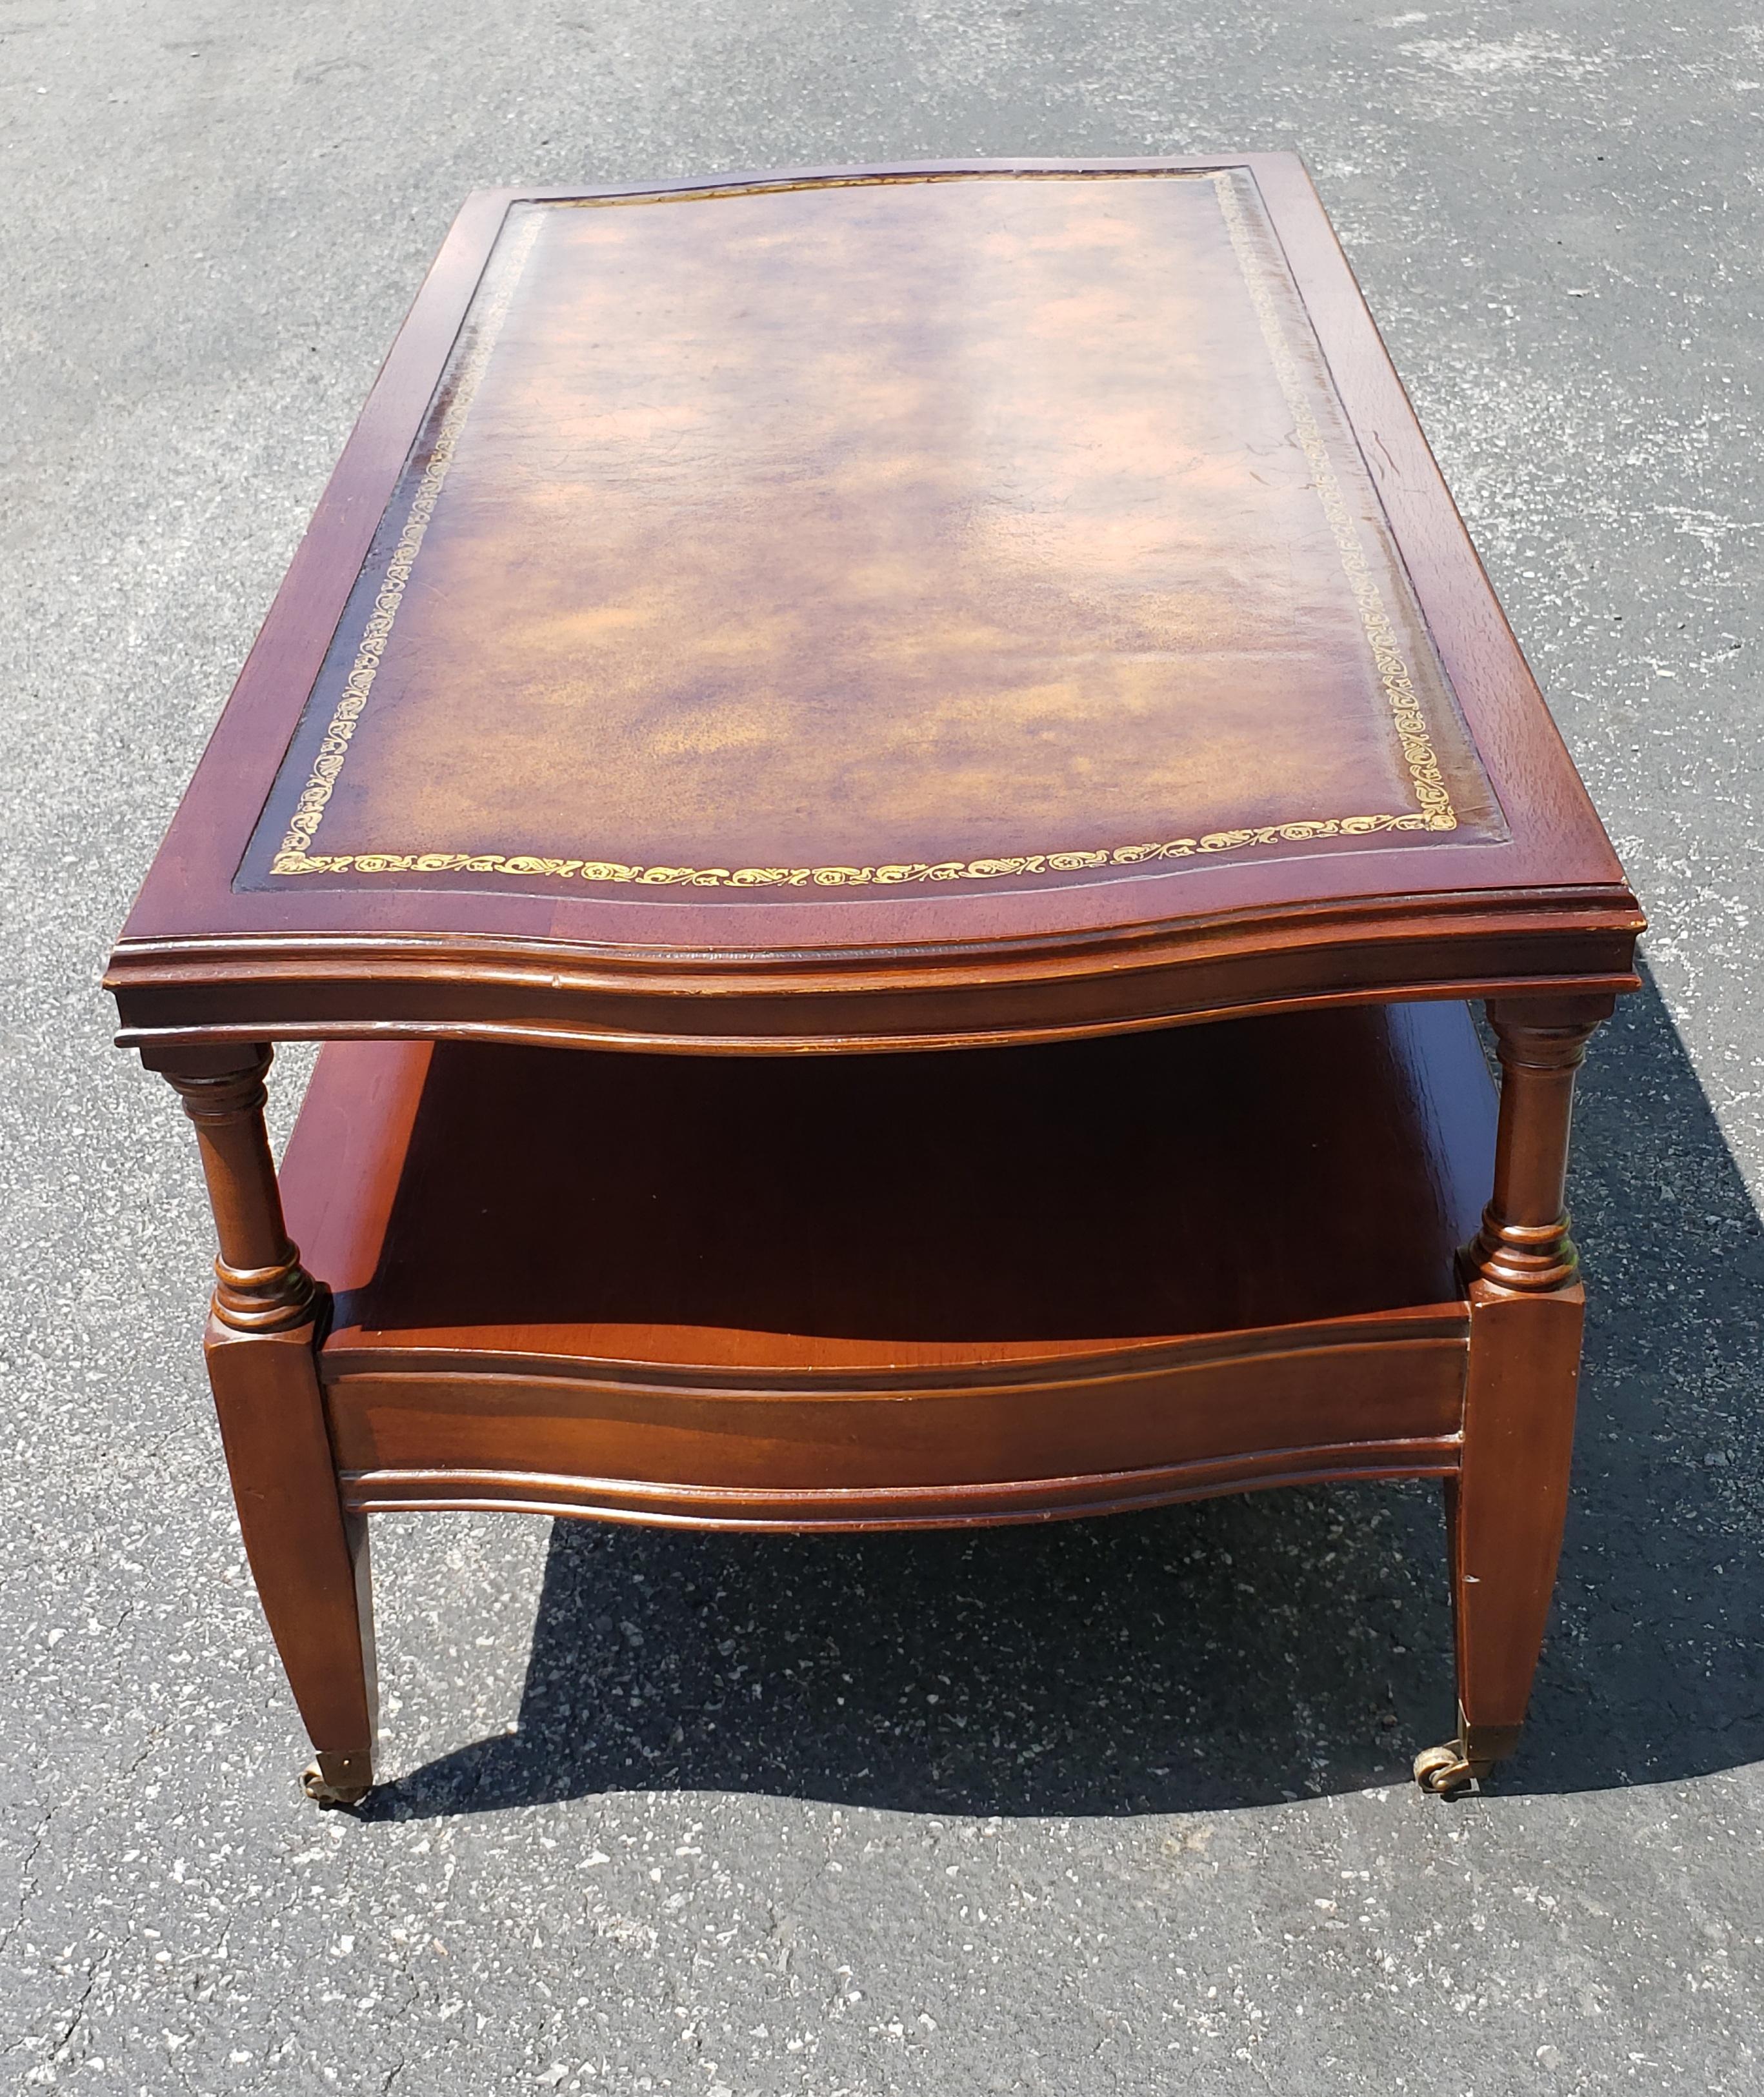 1958 Hollywood Regency Mahogany Tooled Leather Top and Gilt Stencil Coffee Table In Good Condition For Sale In Germantown, MD